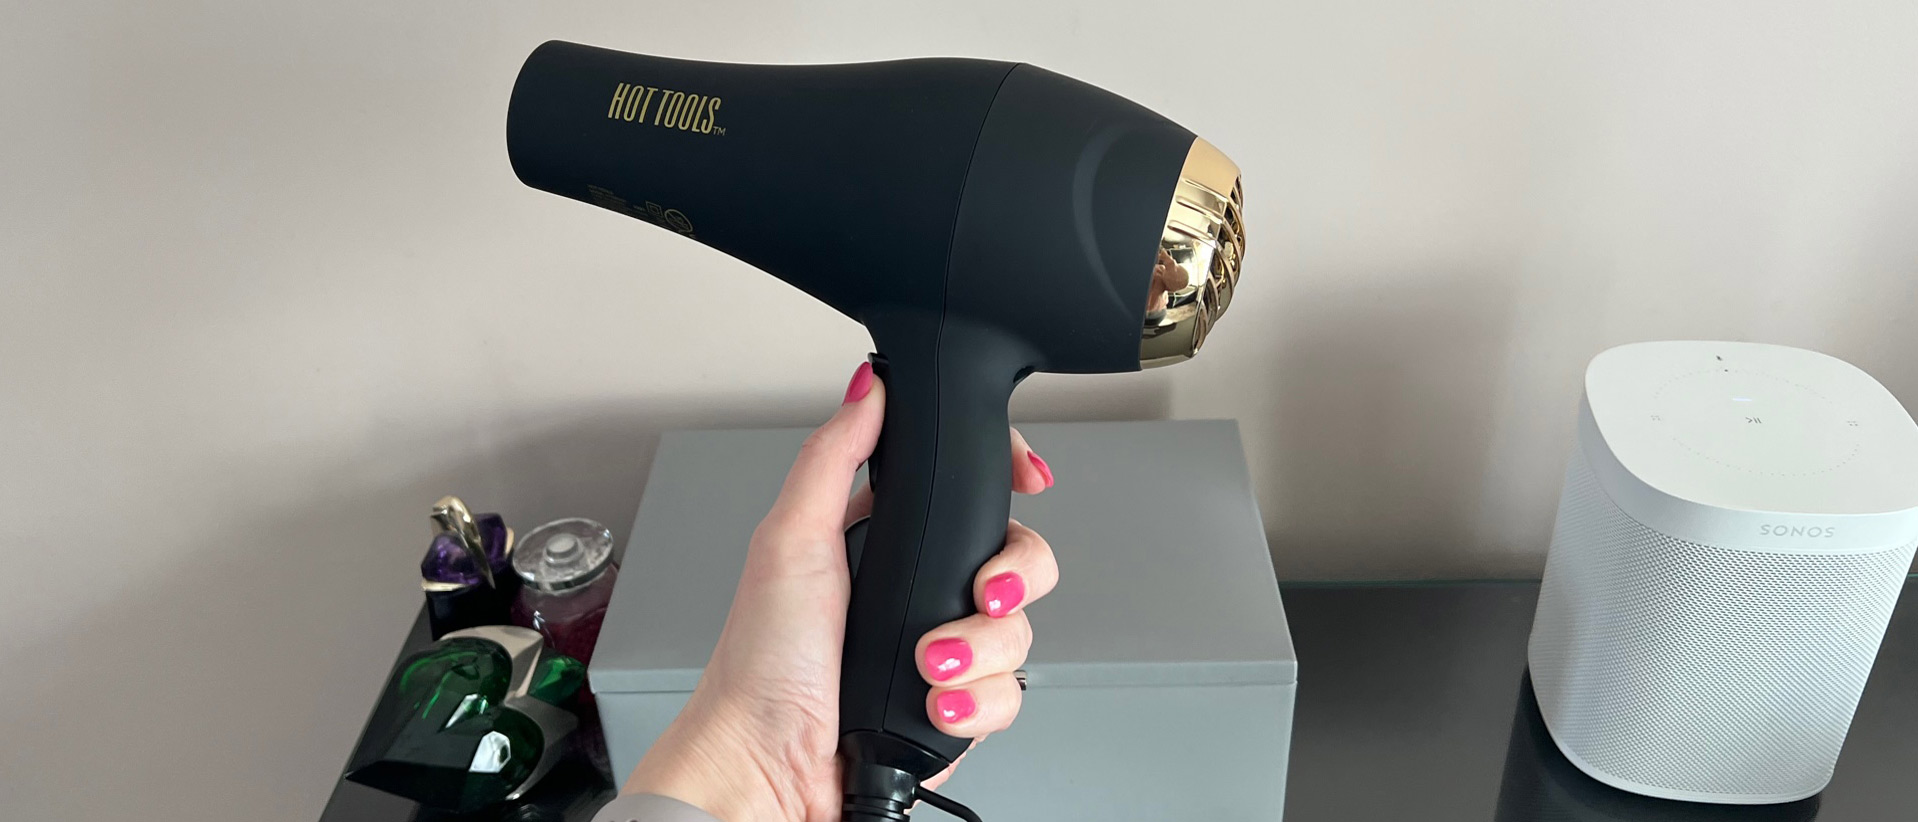 PRO Beauty Tools Professional Hair Dryer Review Price and Features